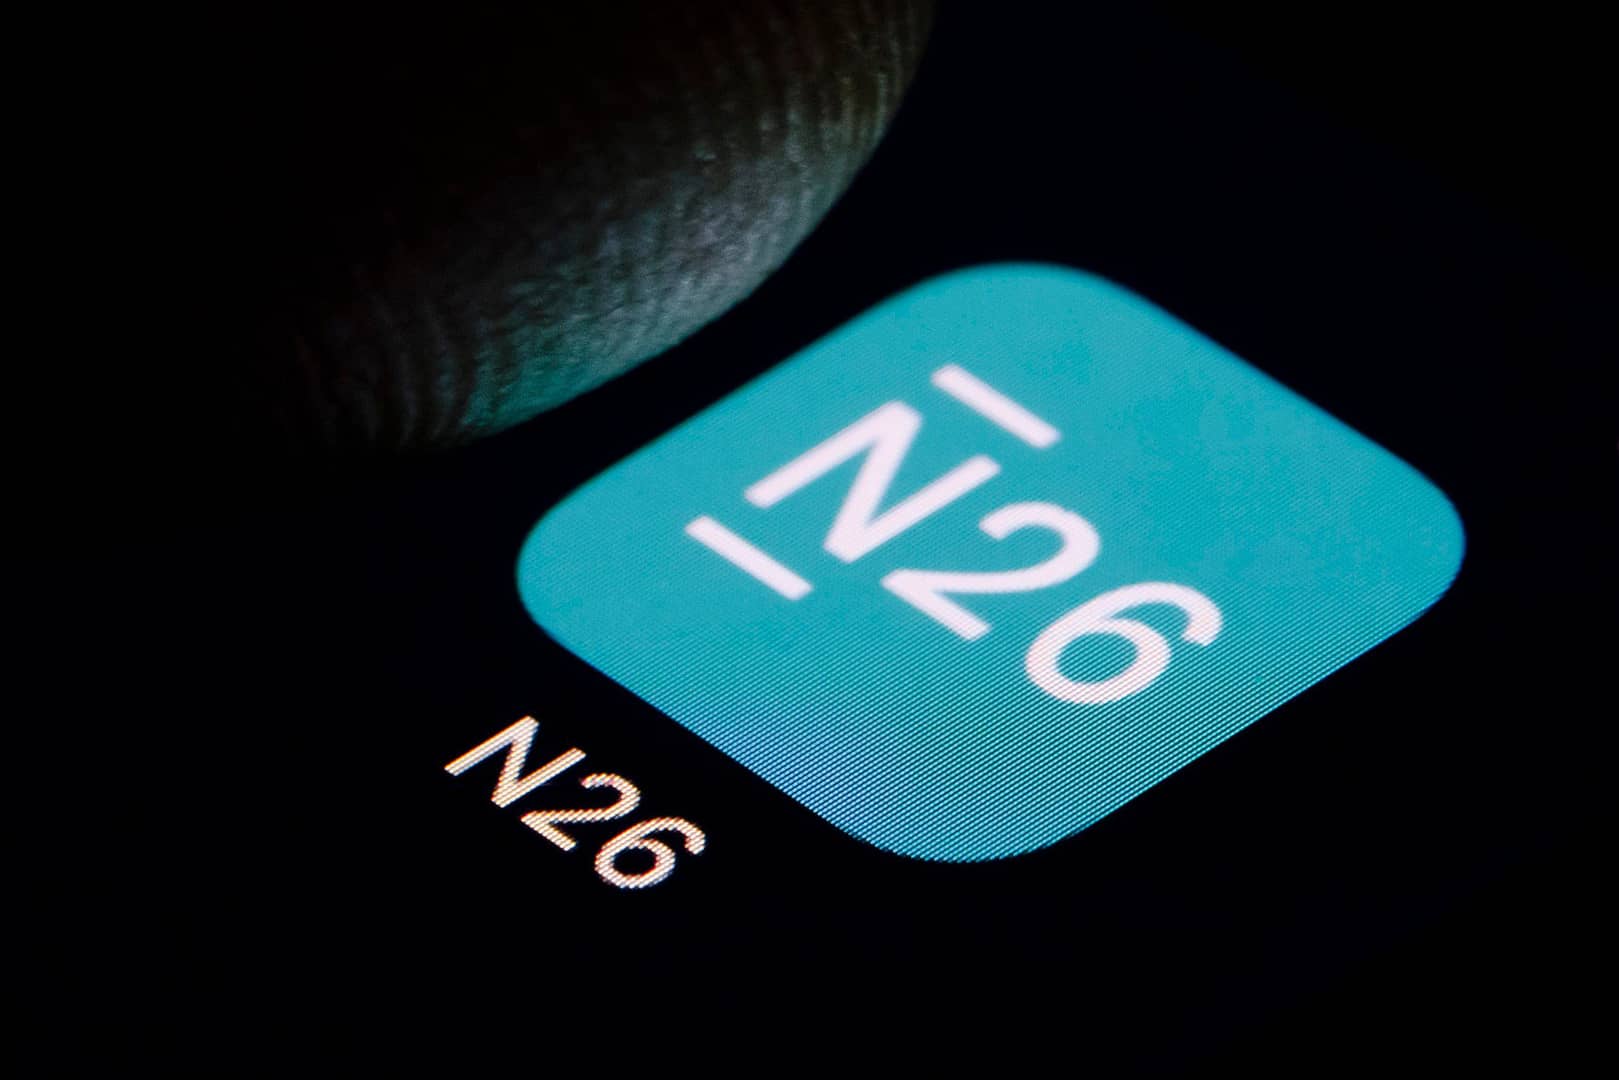     Since November 2020, new clients at N26 have had to pay negative interest - the so-called custody fee is now declining.